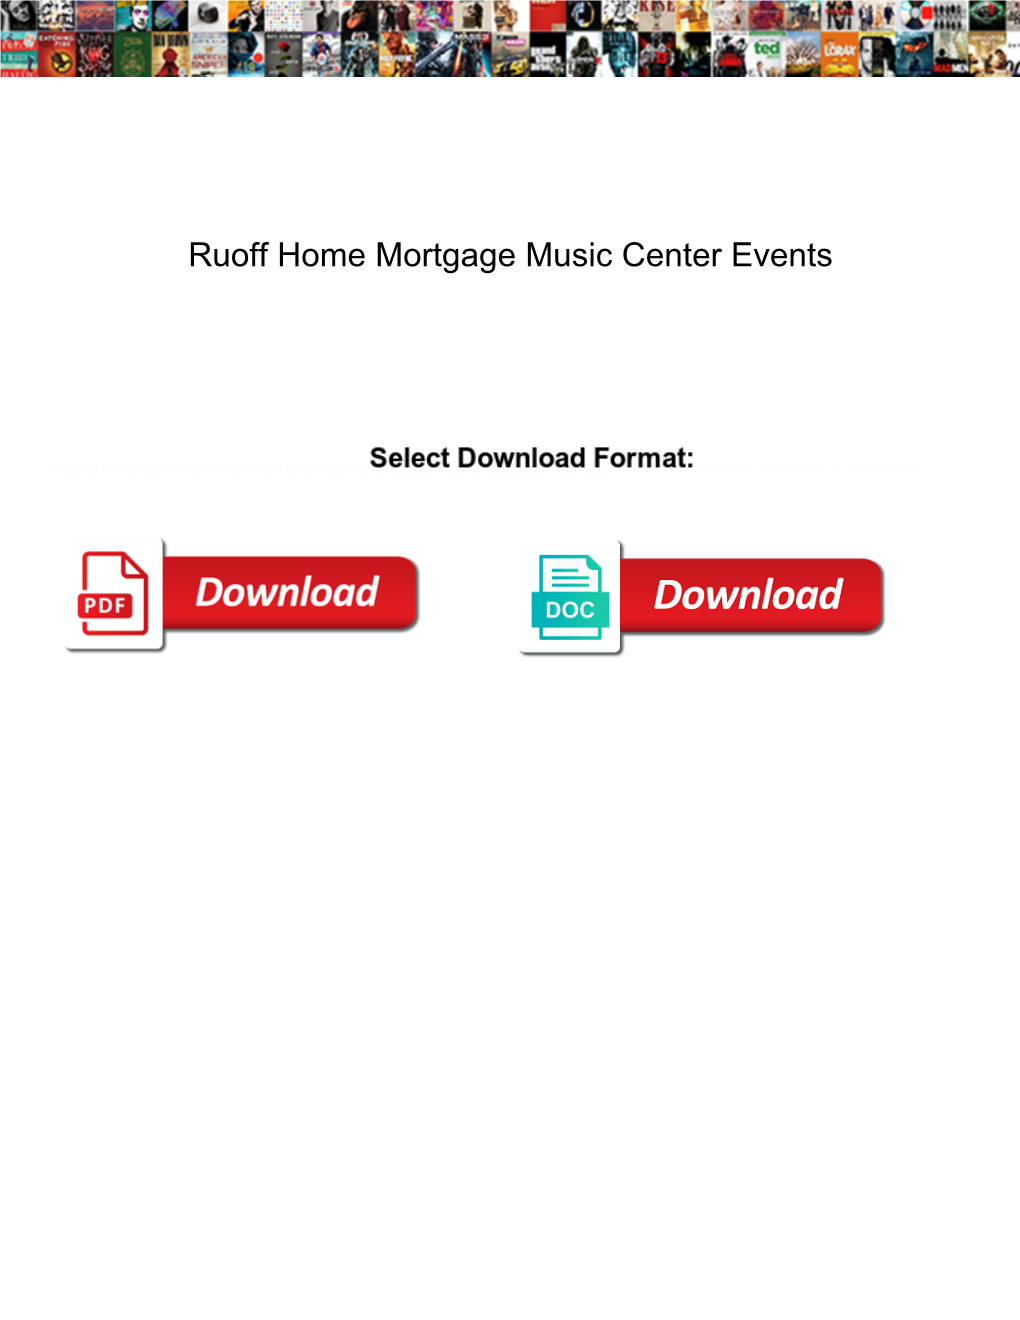 Ruoff Home Mortgage Music Center Events